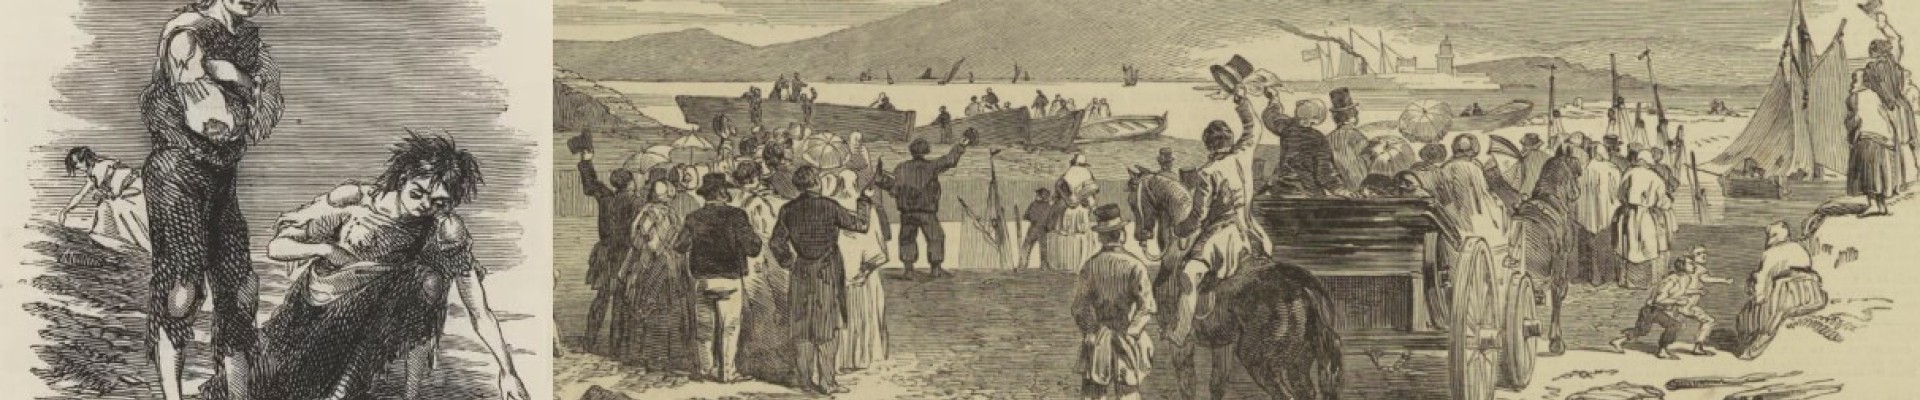 Two images from Illustrated London News depicting famine and immigration